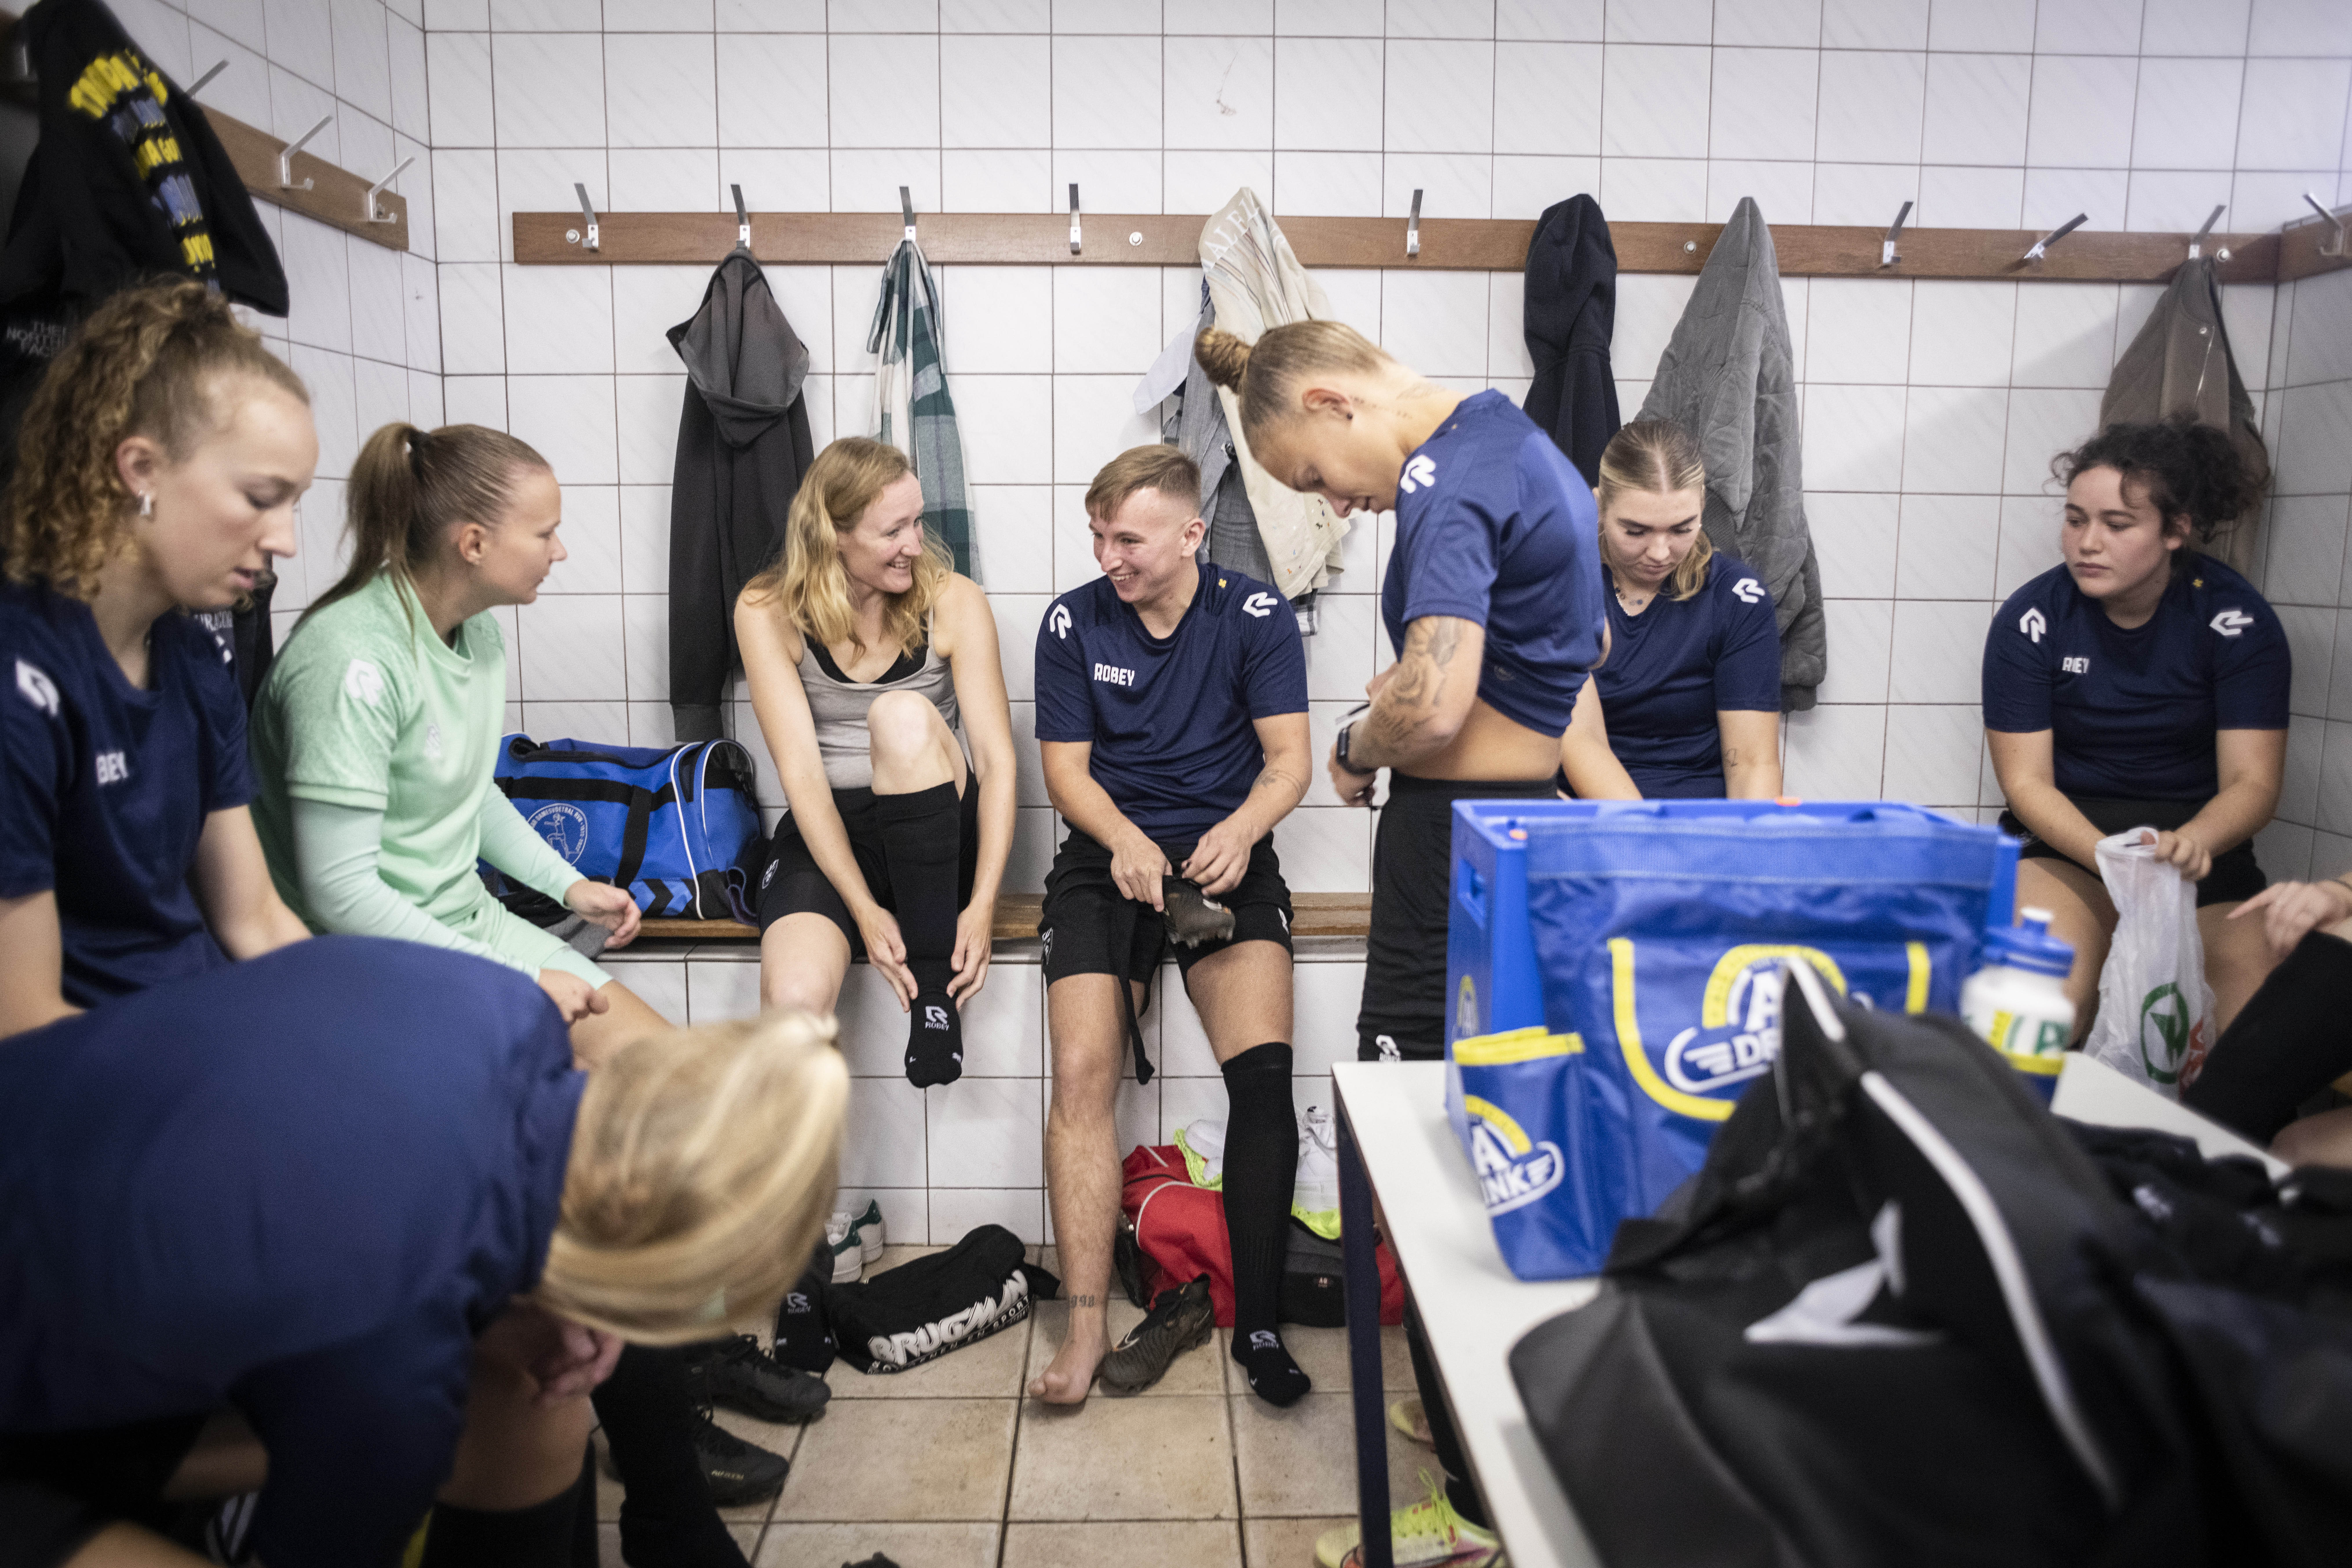 a football team changing in a locker room, putting their dark blue and black jersey while chatting. There are clothes and sports bags everywhere